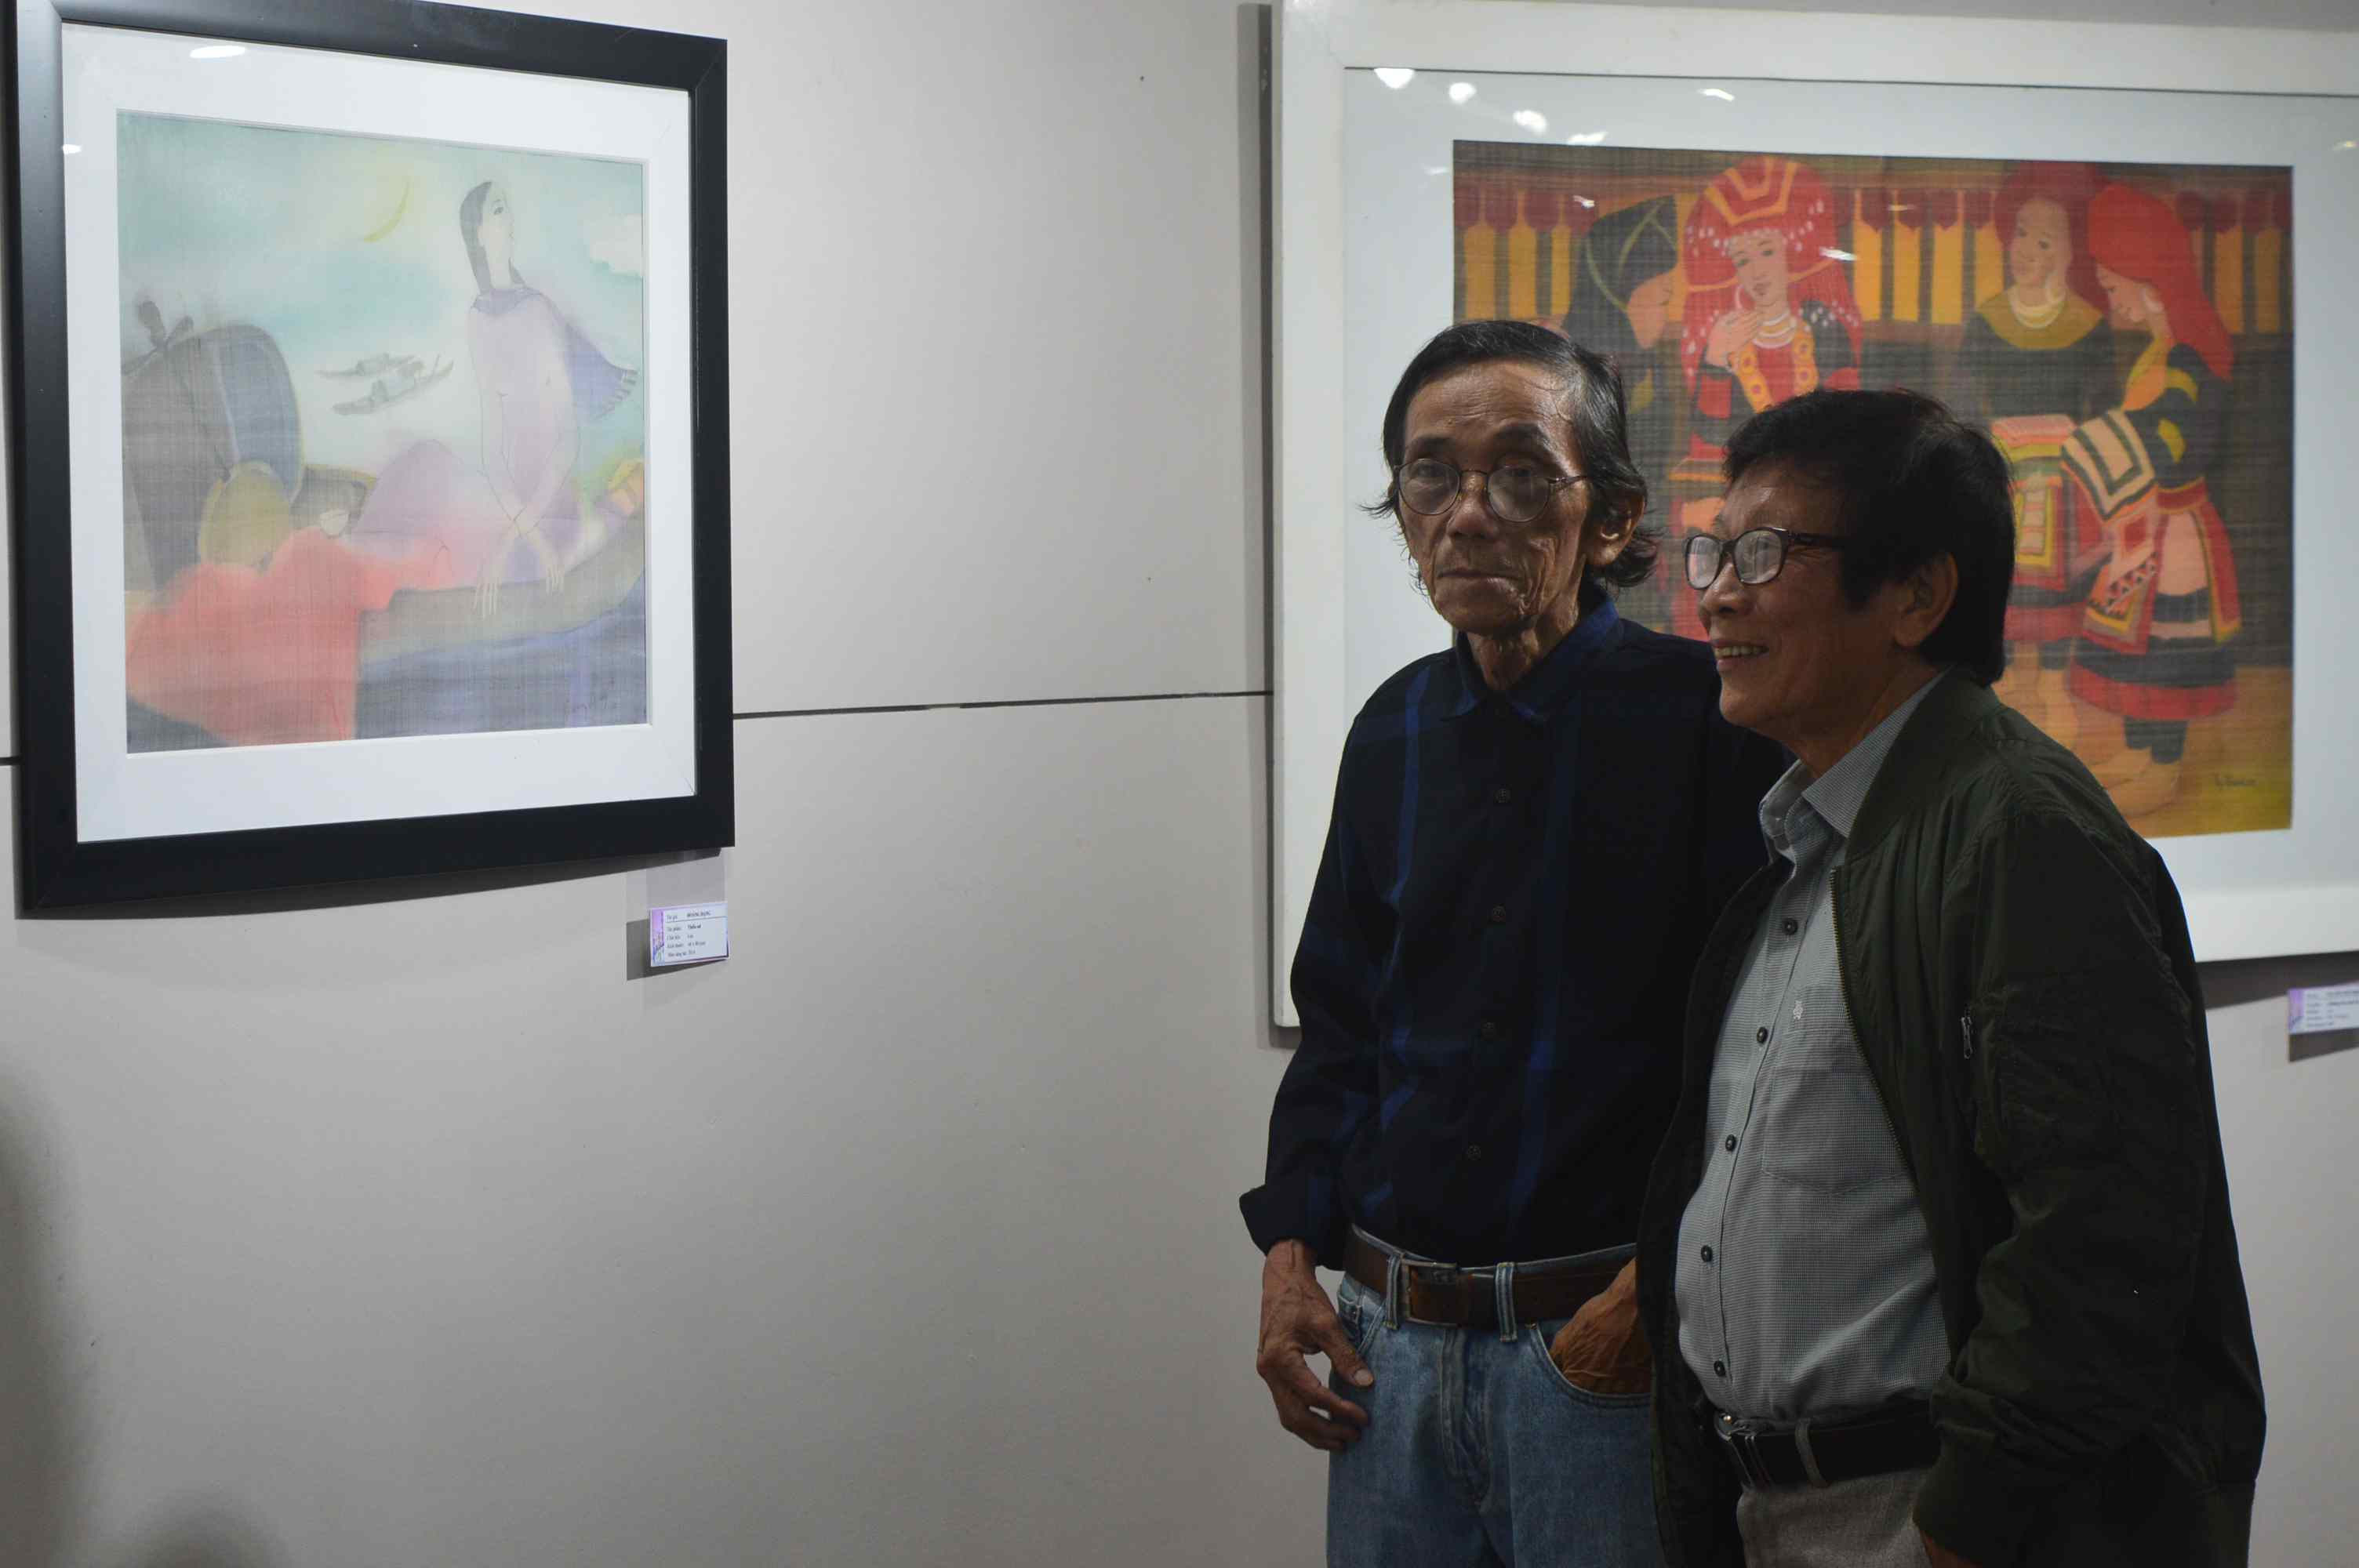 Visitors viewing the displayed paintings at the exhibition